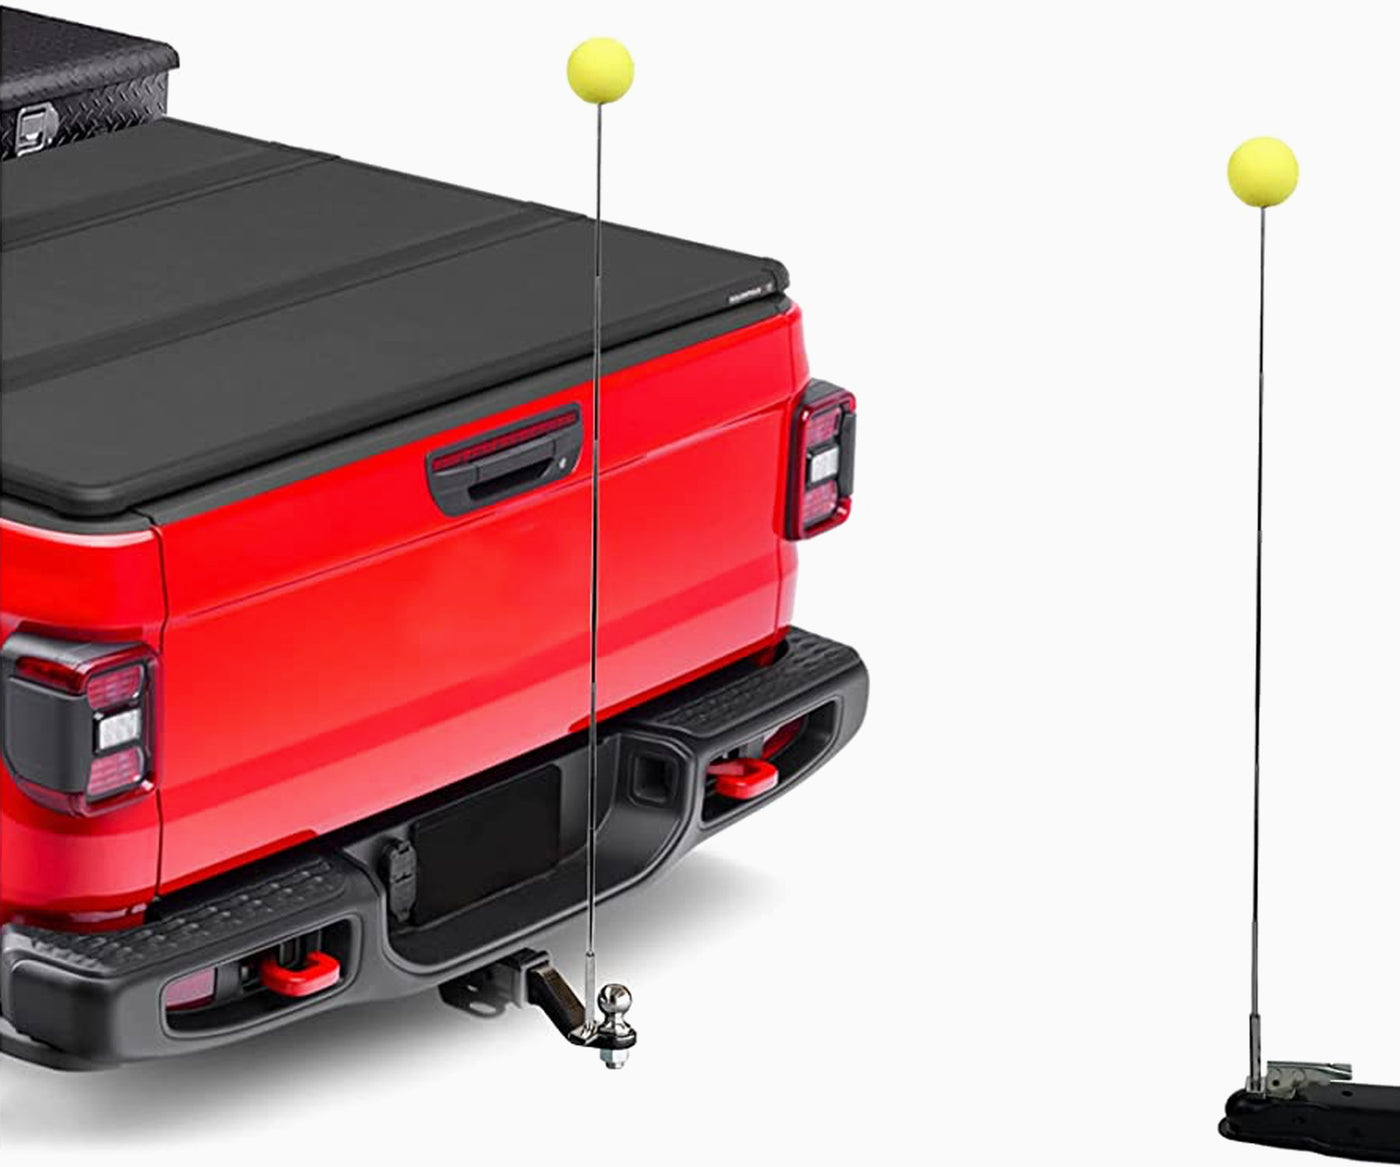 Truck using the JounJip Trailer Hitch Alignment Kit to perfectly align to the hitch of a trailer.